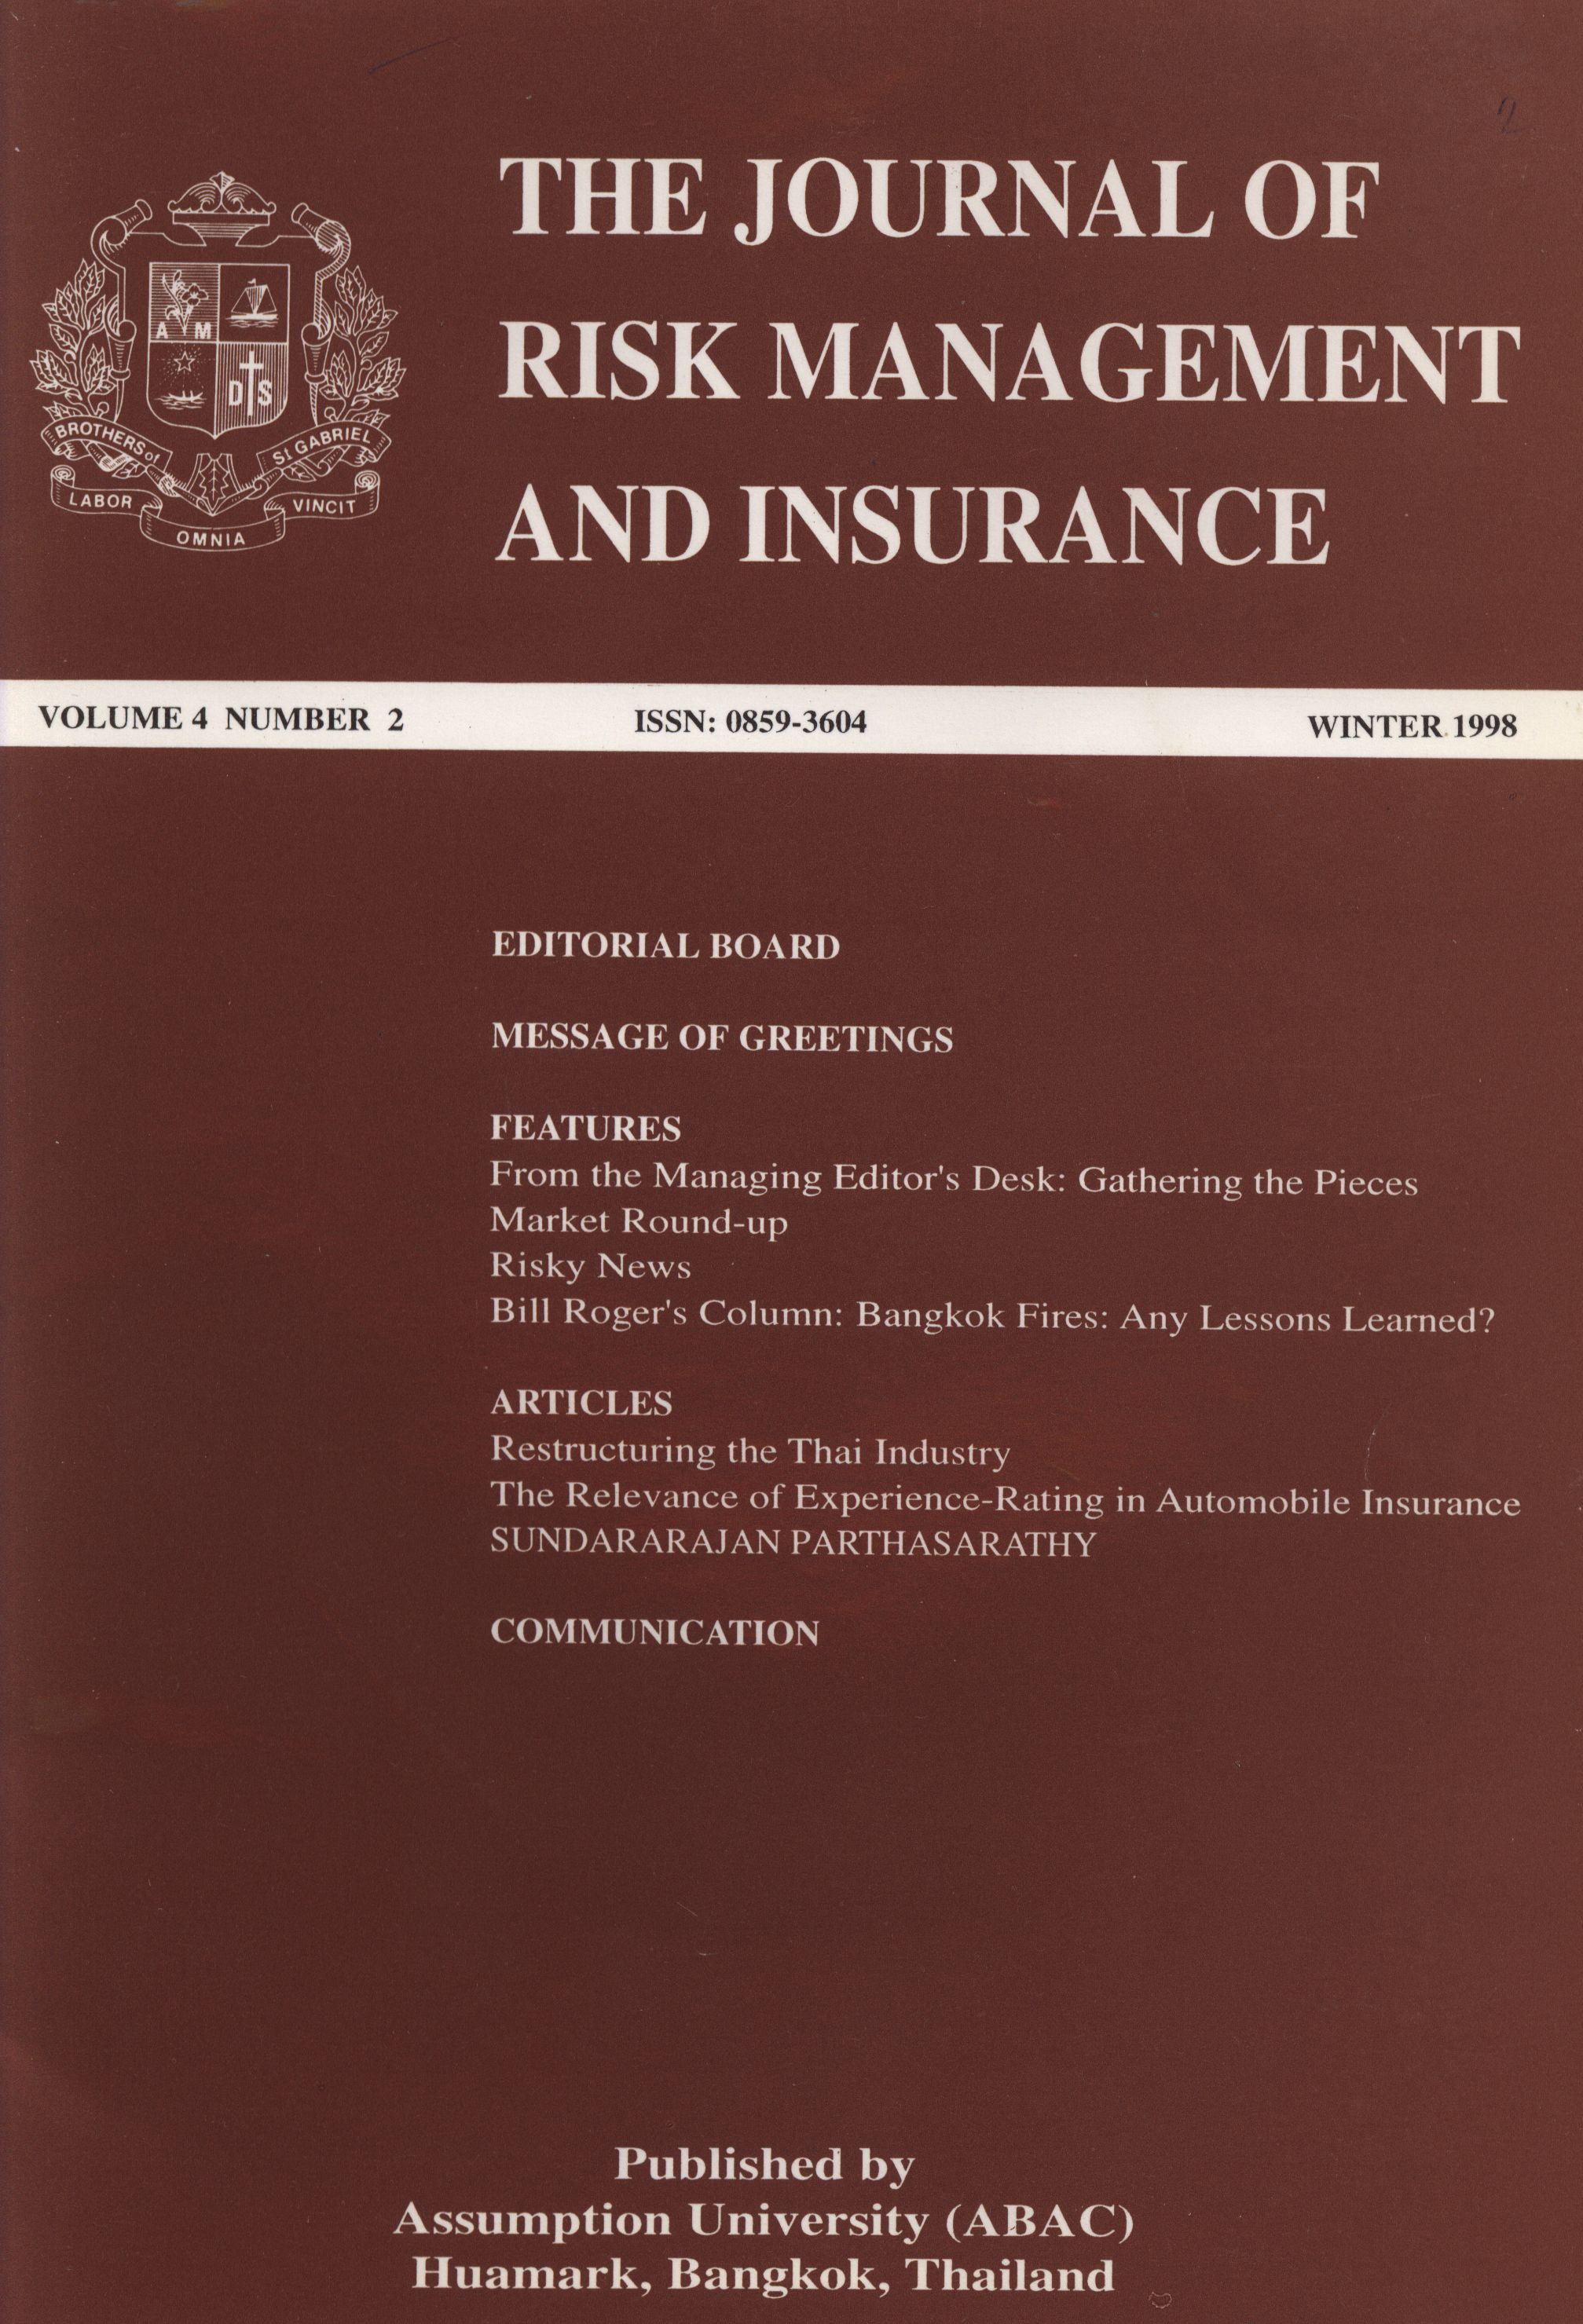 					View Vol. 4 No. 2 (1998): The Journal of Risk Management and Insurance
				